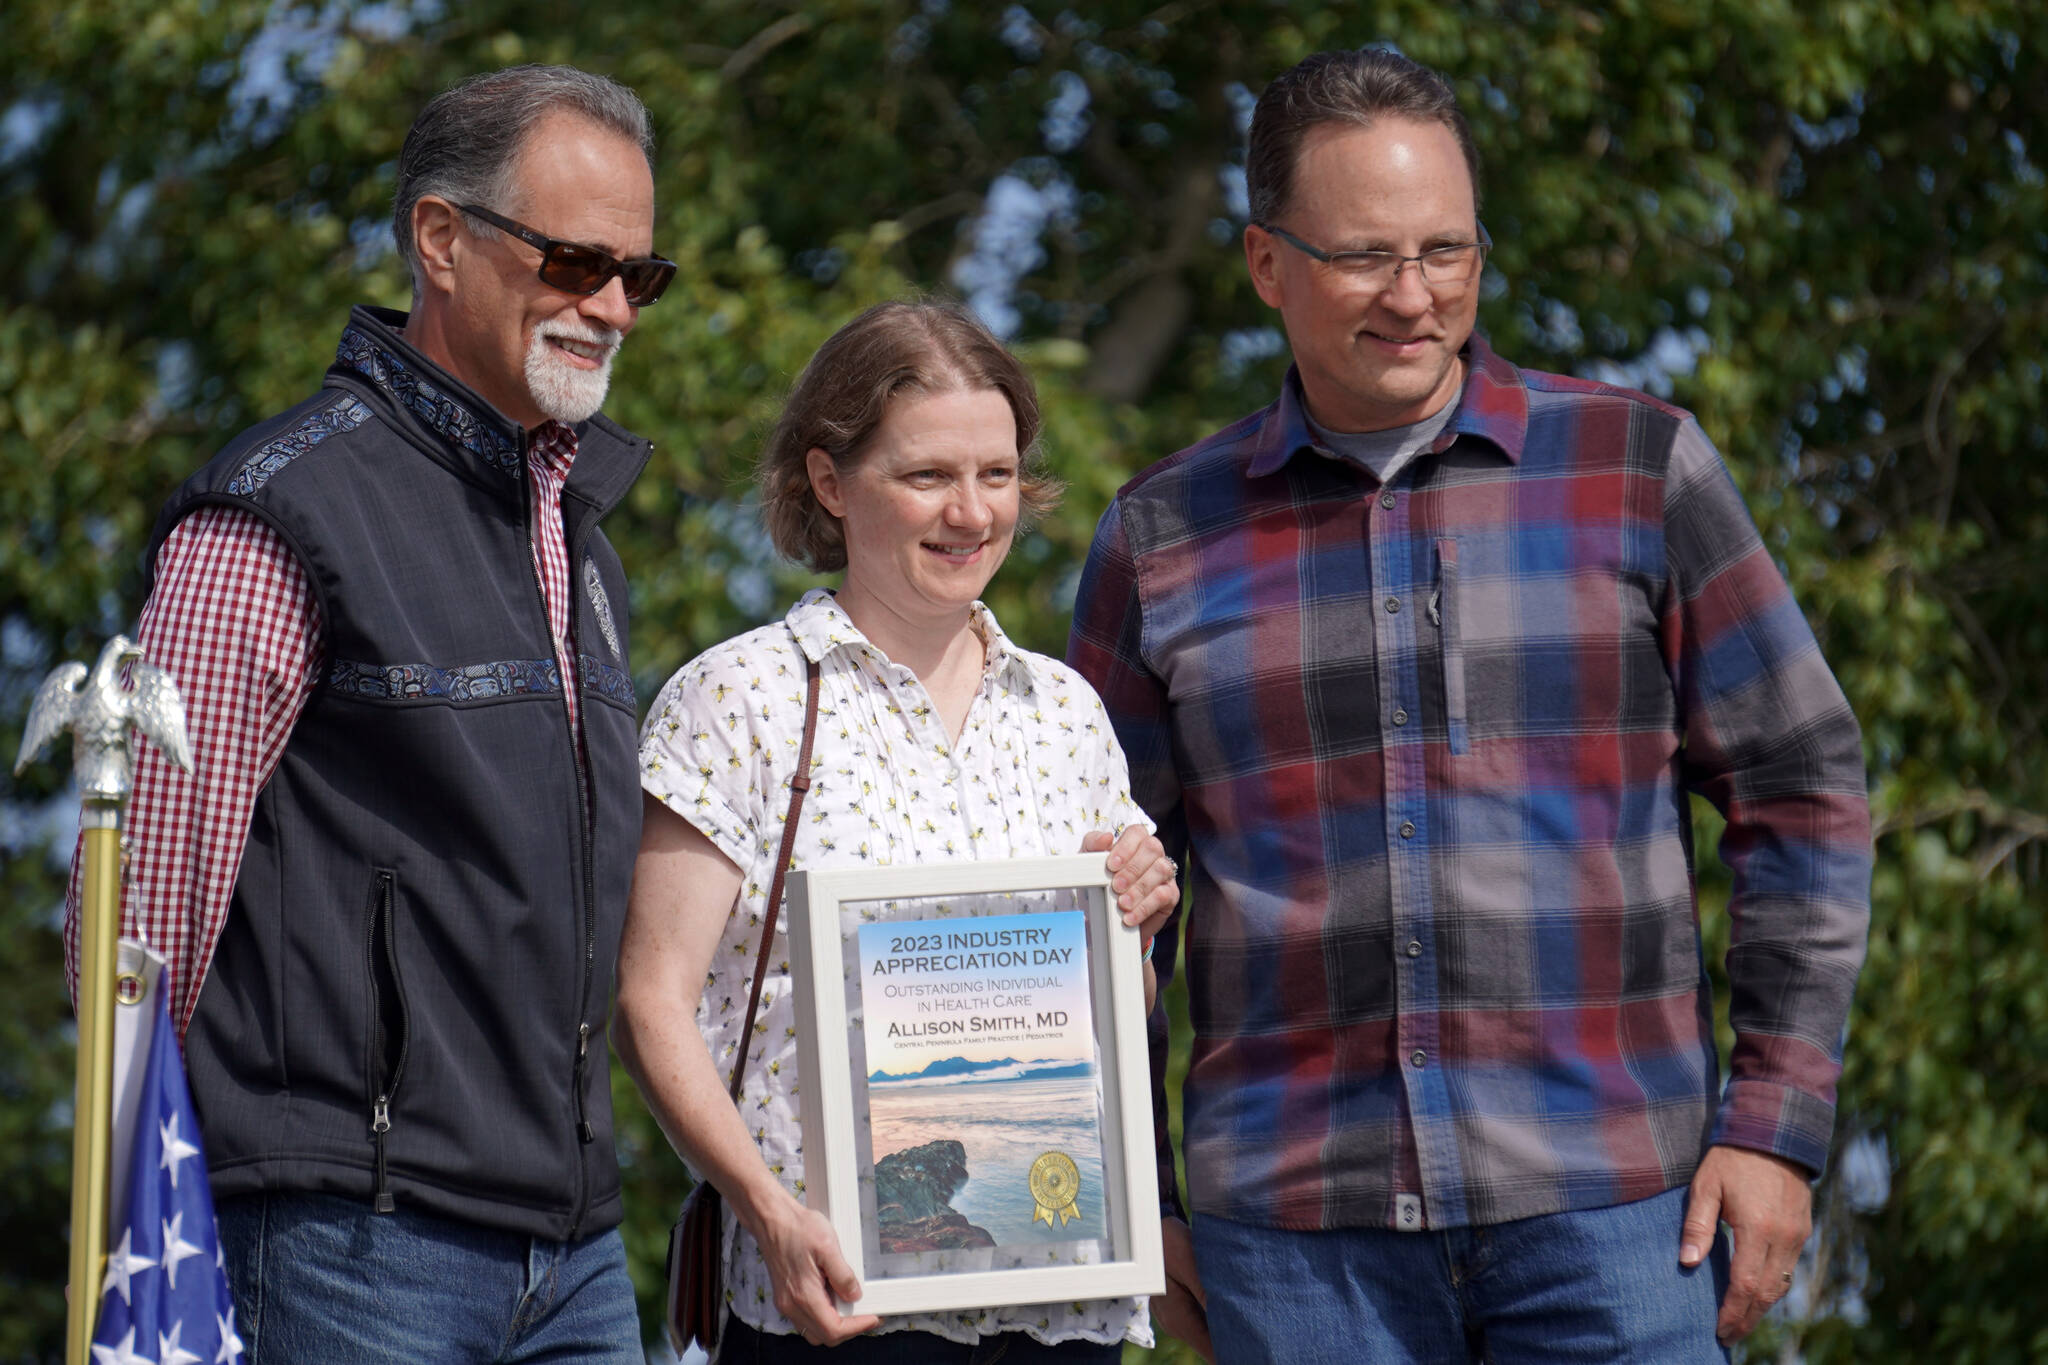 Dr. Allison Smith, center, receives the Outstanding Individual in Health Care Award from Kenai Peninsula Borough Mayor Peter Micciche and Rep. Ben Carptenter, R-Nikiski, during Industry Appreciation Day festivities at the Kenai softball greenstrip on Saturday, Aug. 19, 2023. (Jake Dye/Peninsula Clarion)